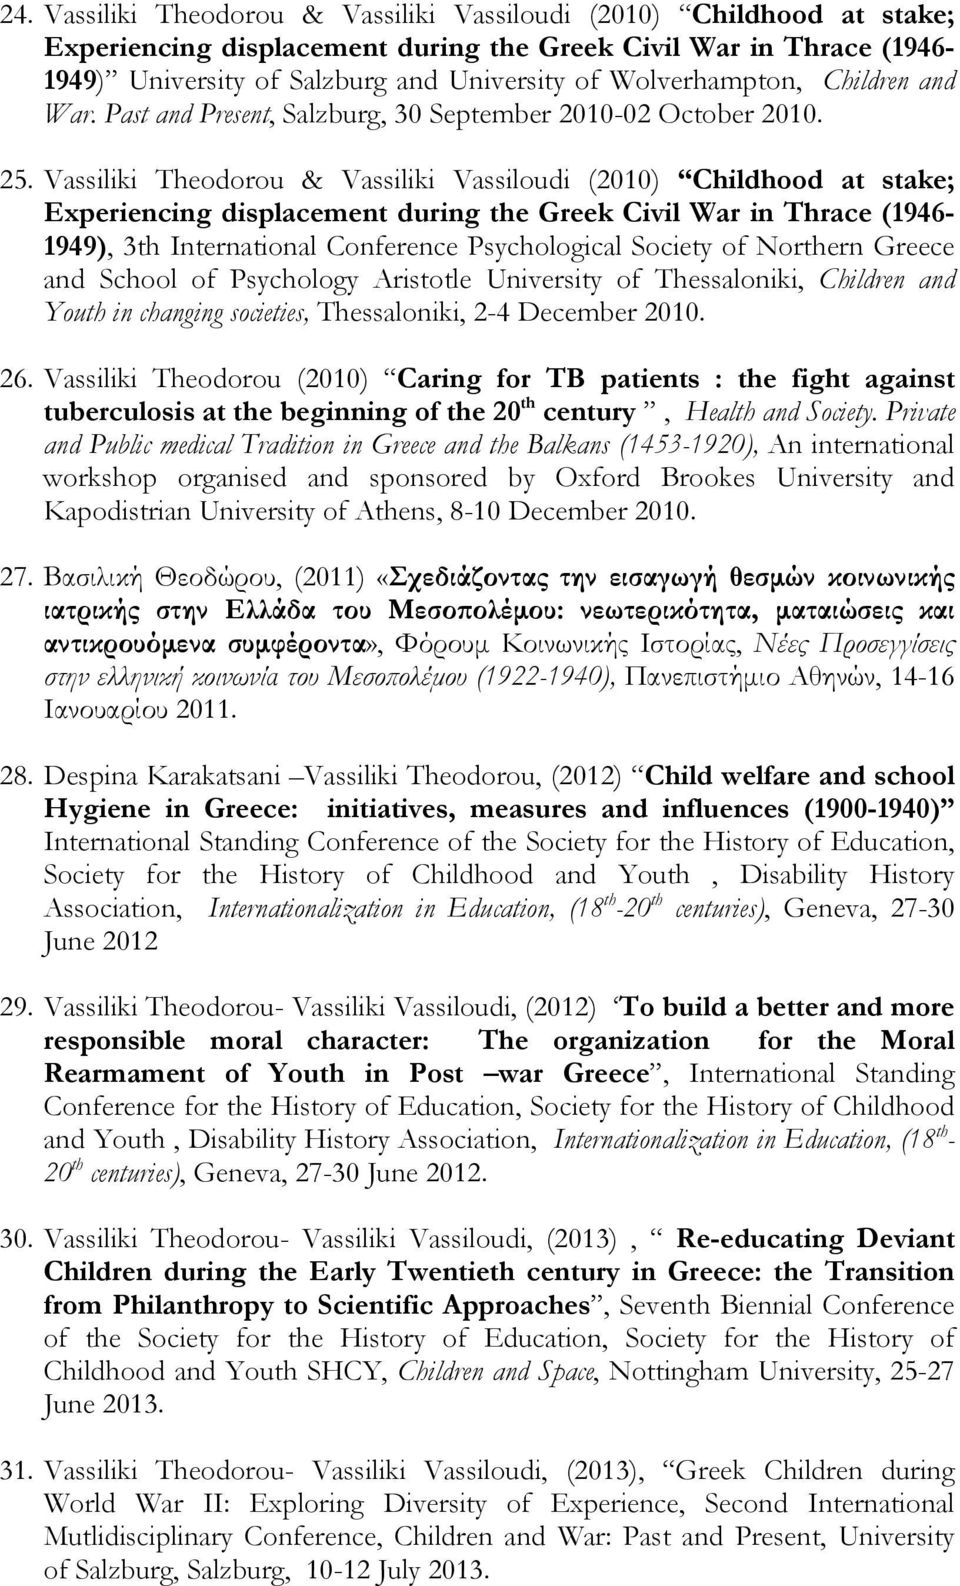 Vassiliki Theodorou & Vassiliki Vassiloudi (2010) Childhood at stake; Experiencing displacement during the Greek Civil War in Thrace (1946-1949), 3th International Conference Psychological Society of